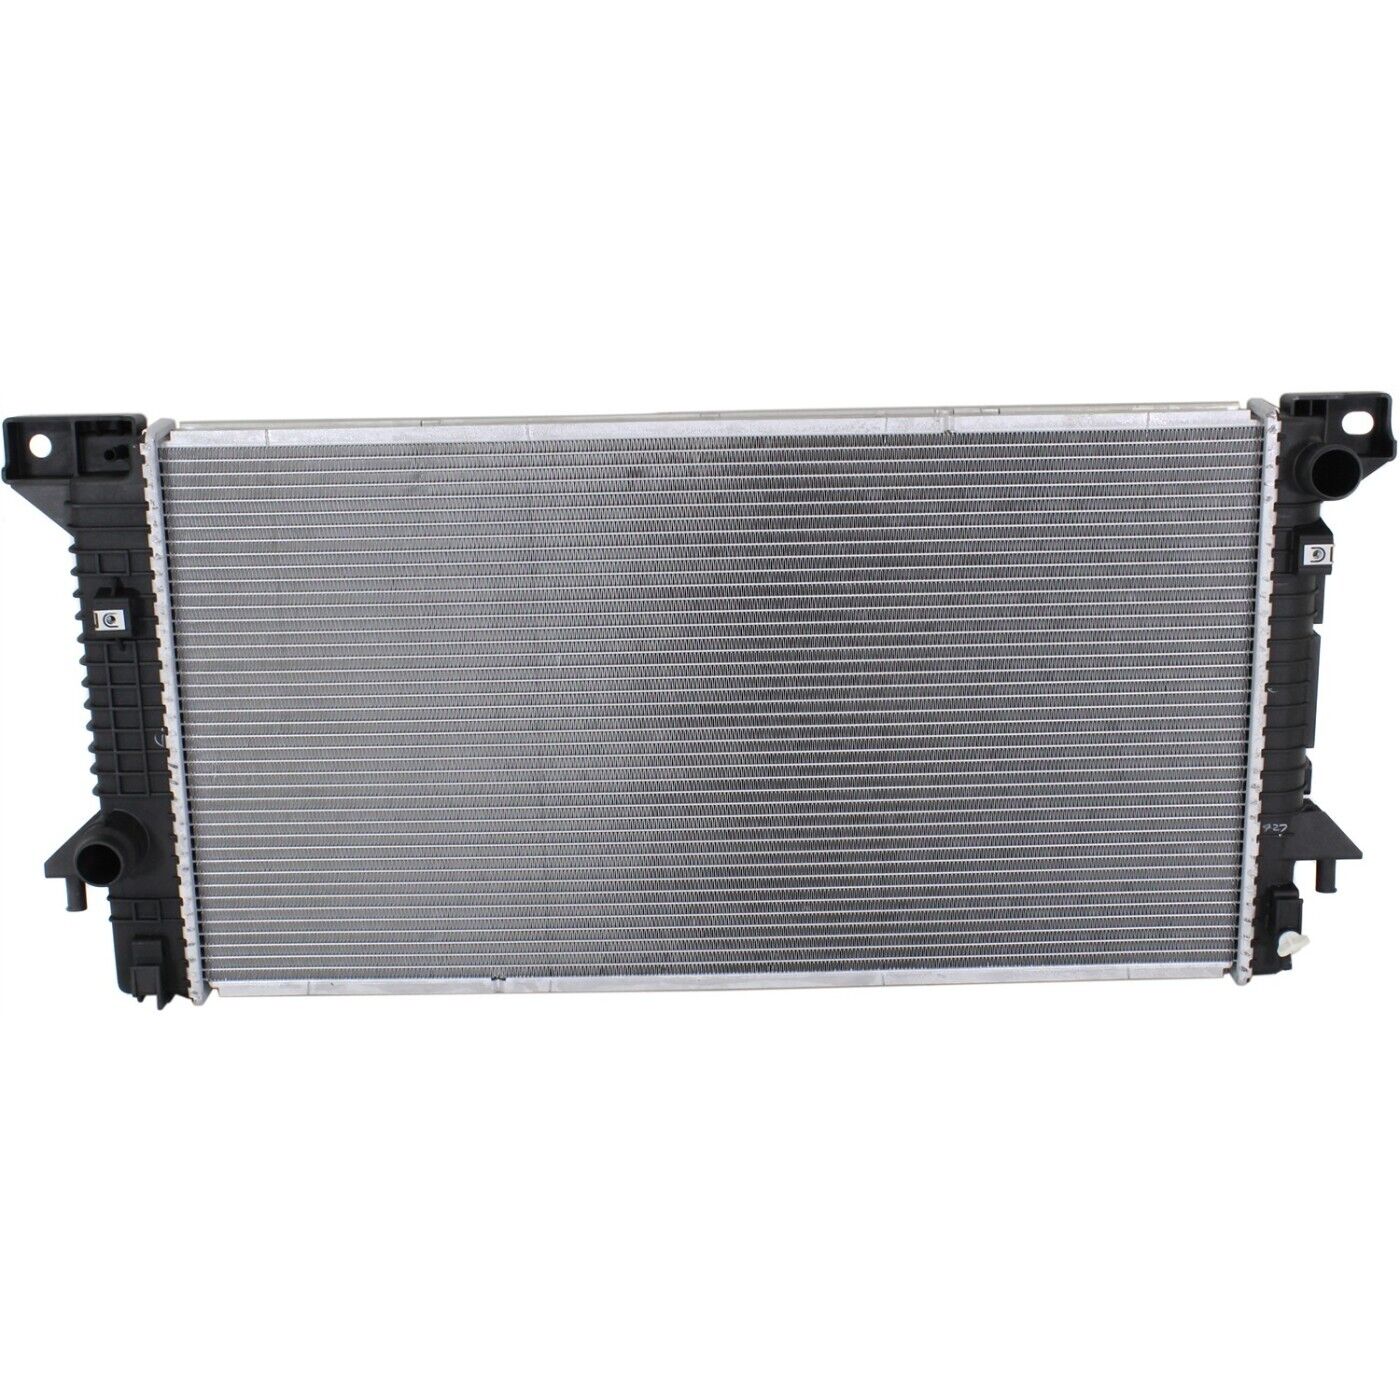 Aluminum Radiator For 2011-14 Ford F-150 3.5L 5.0L 1-Row Core With Super Cooling